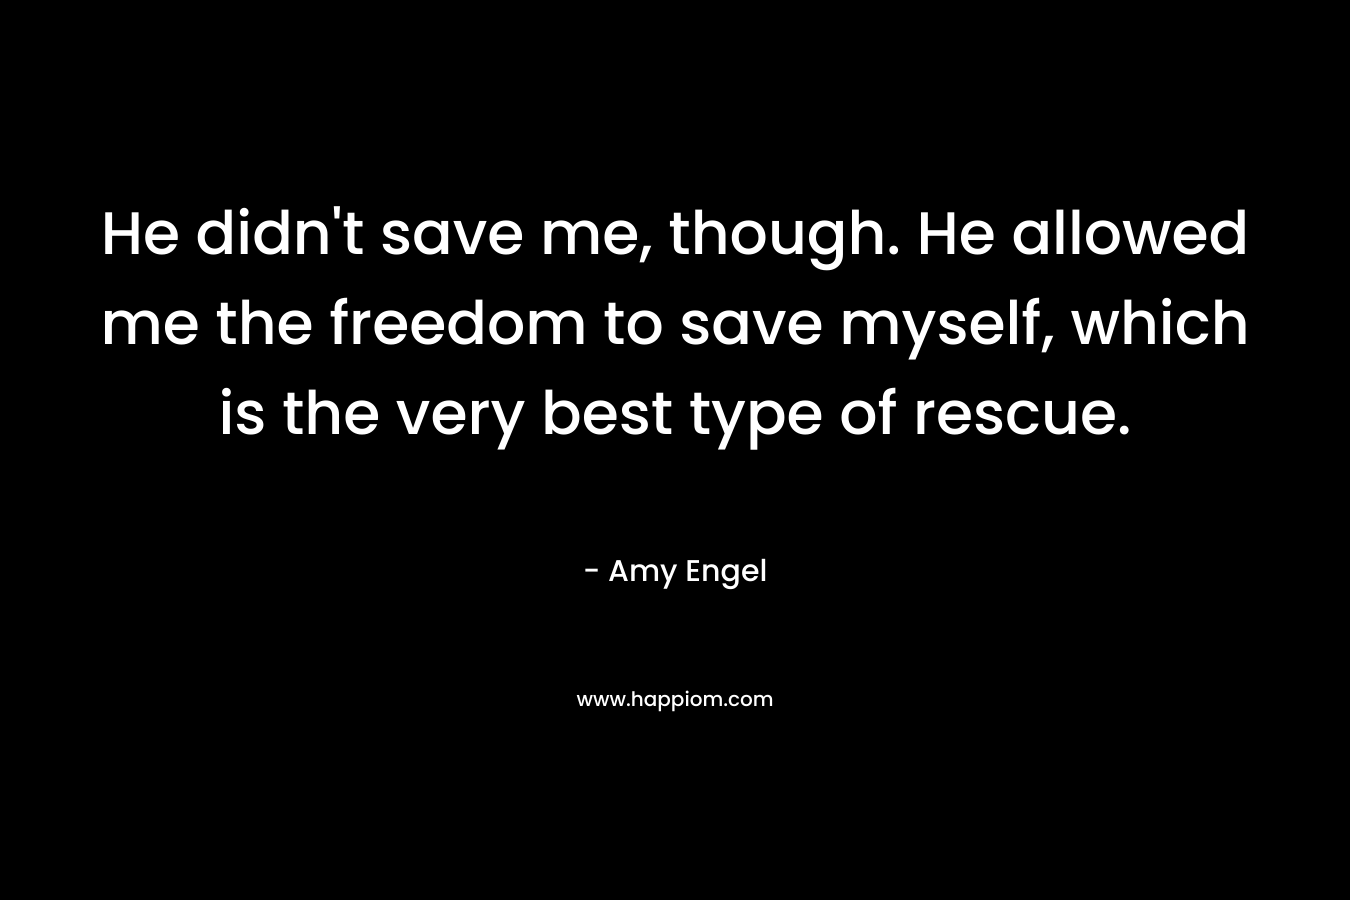 He didn't save me, though. He allowed me the freedom to save myself, which is the very best type of rescue.